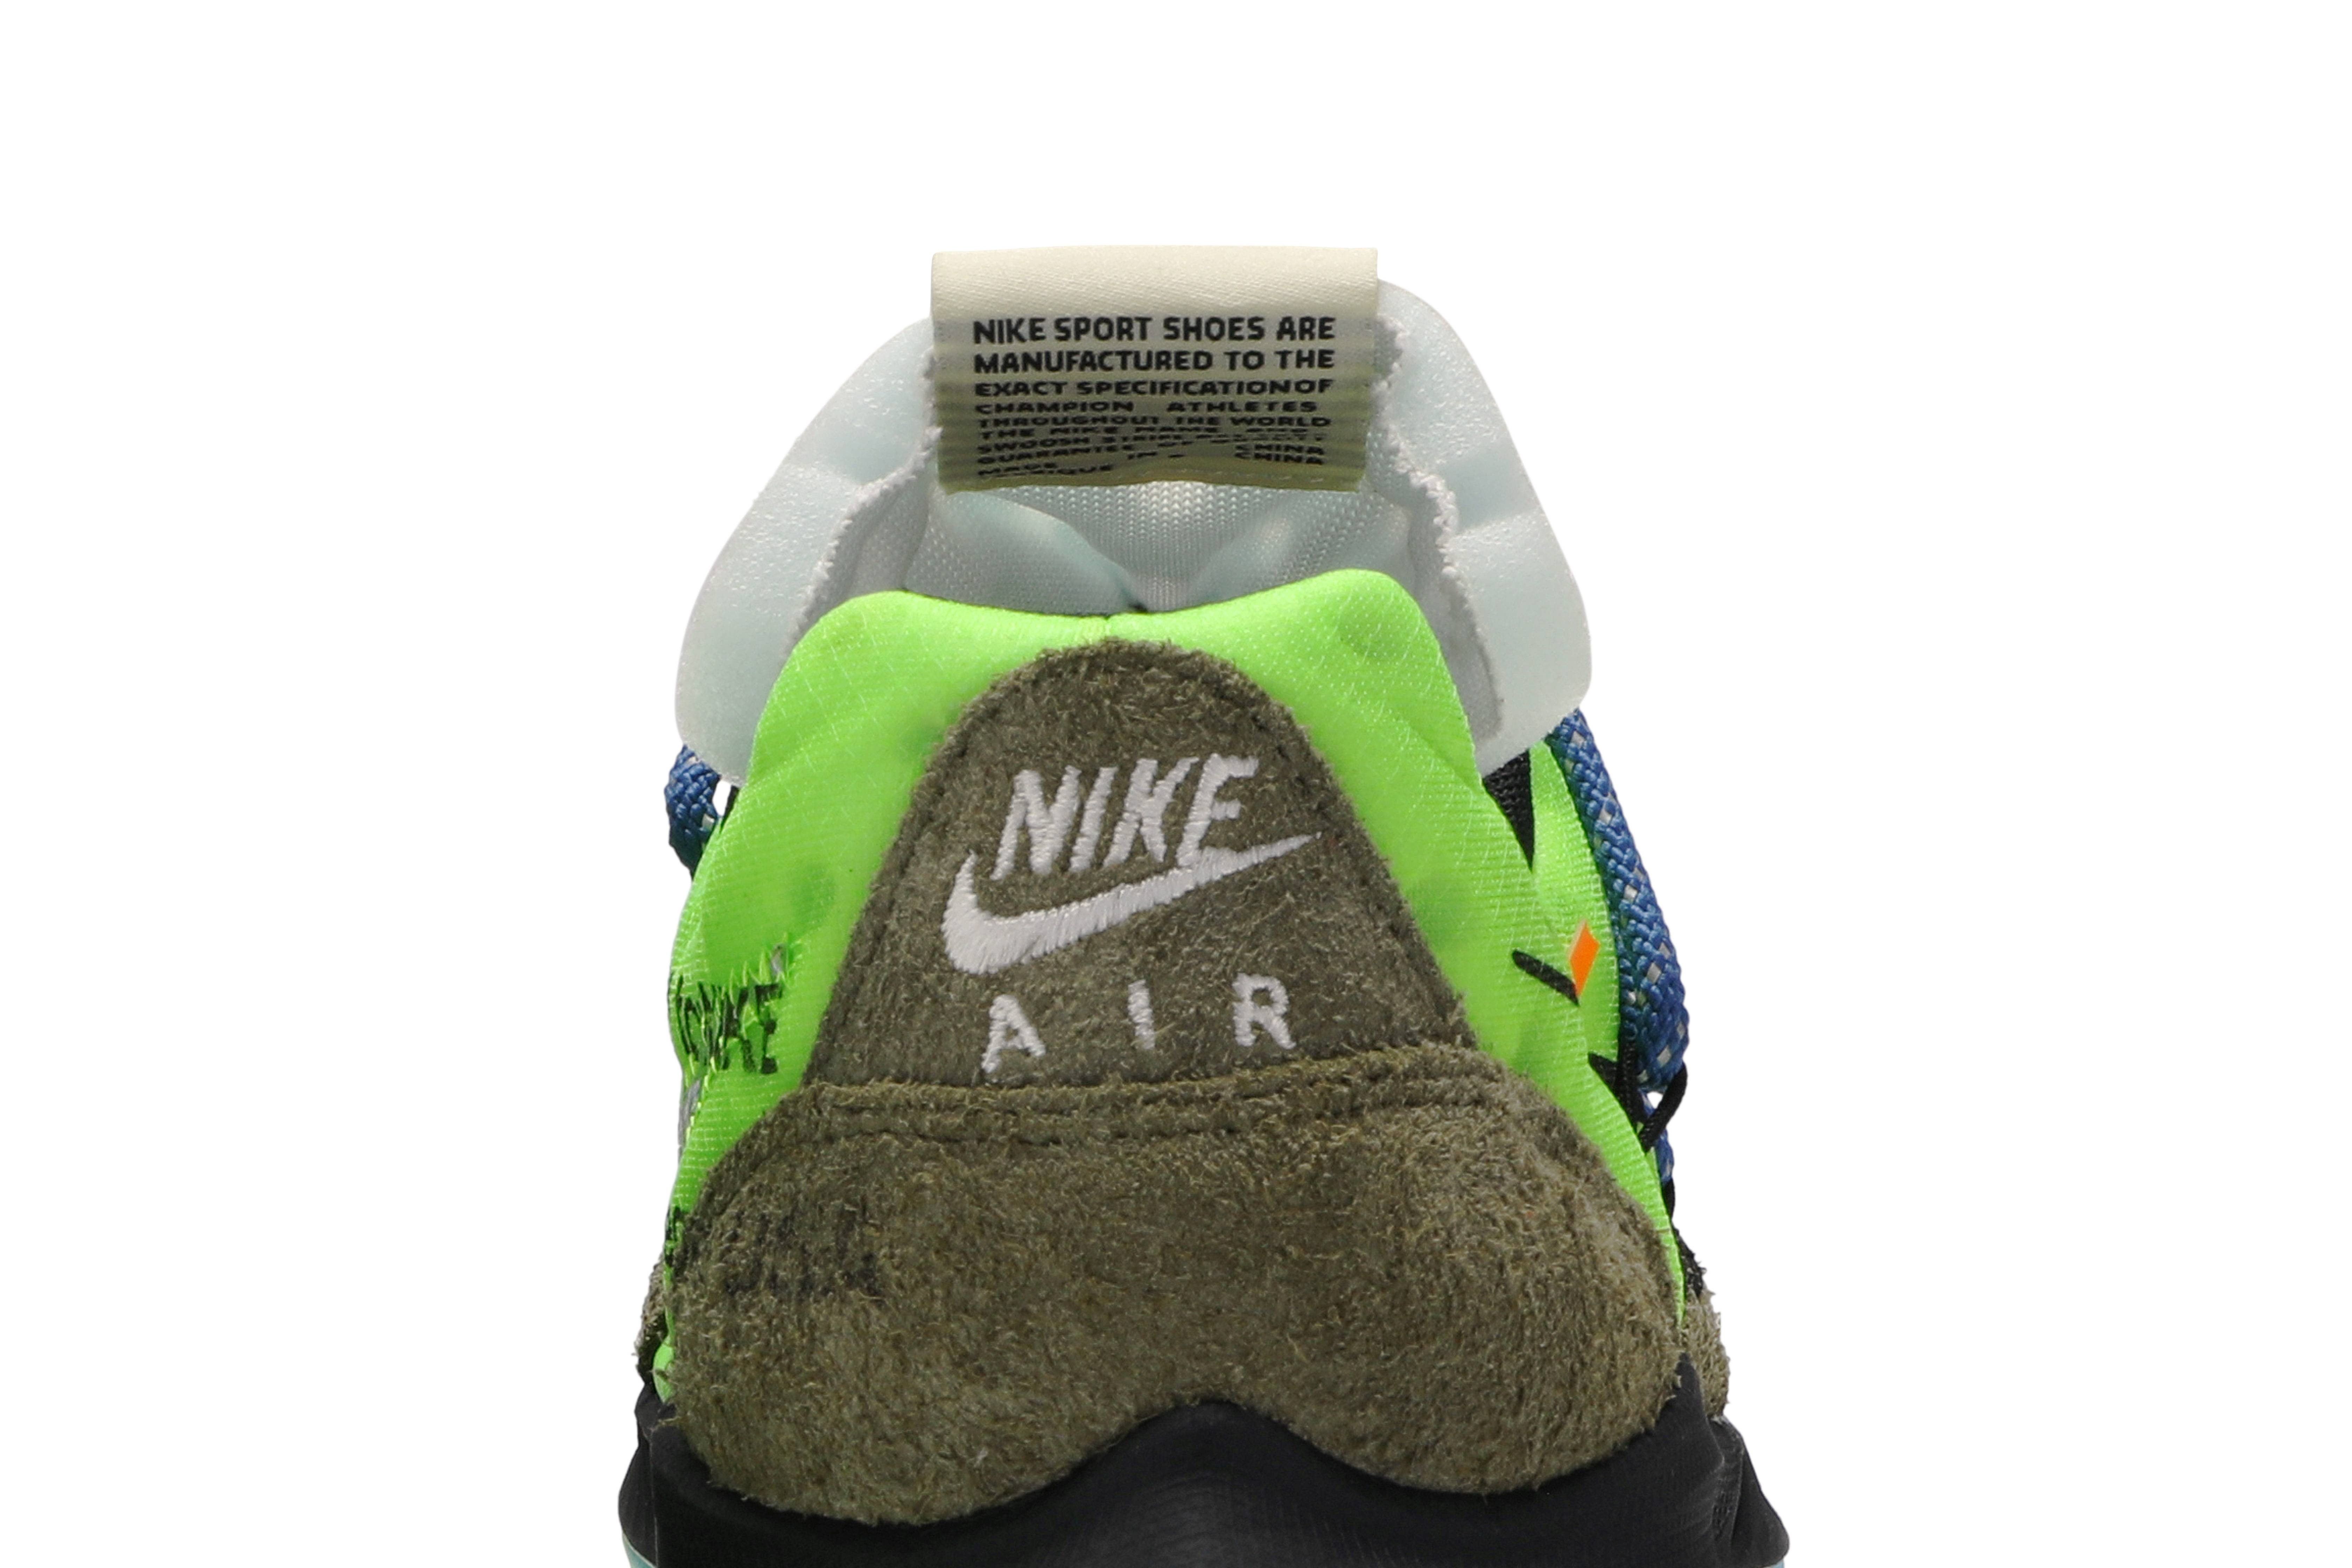 Off-White x Wmns Air Zoom Terra Kiger 5 'Athlete in Progress - Electric Green' - 7